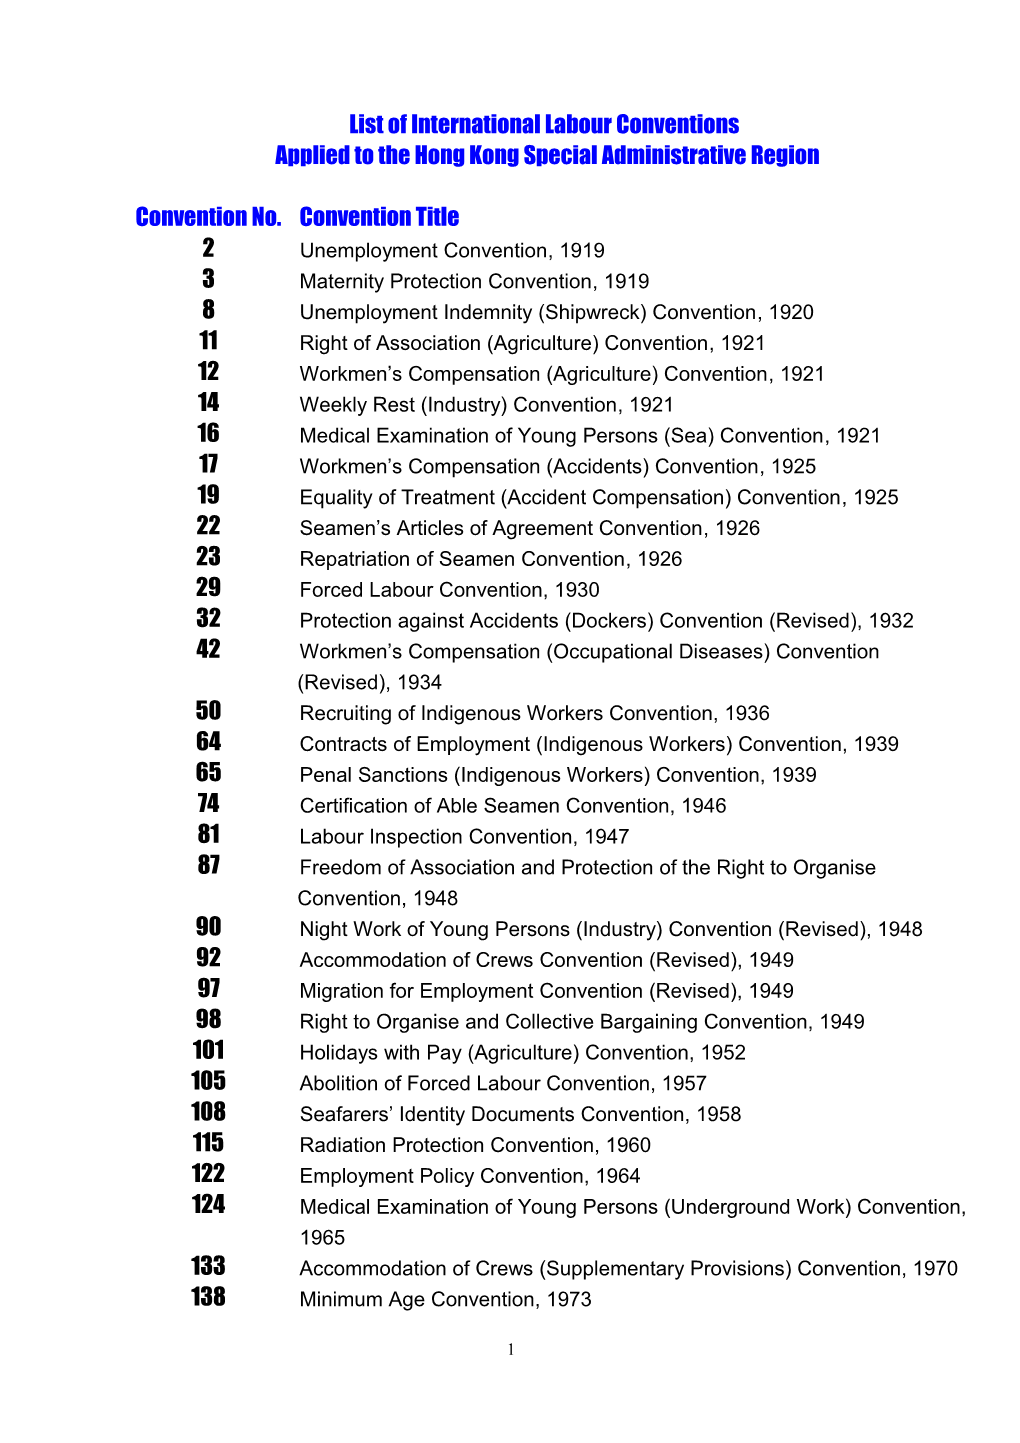 List of International Labour Conventions Applied to Hong Kong